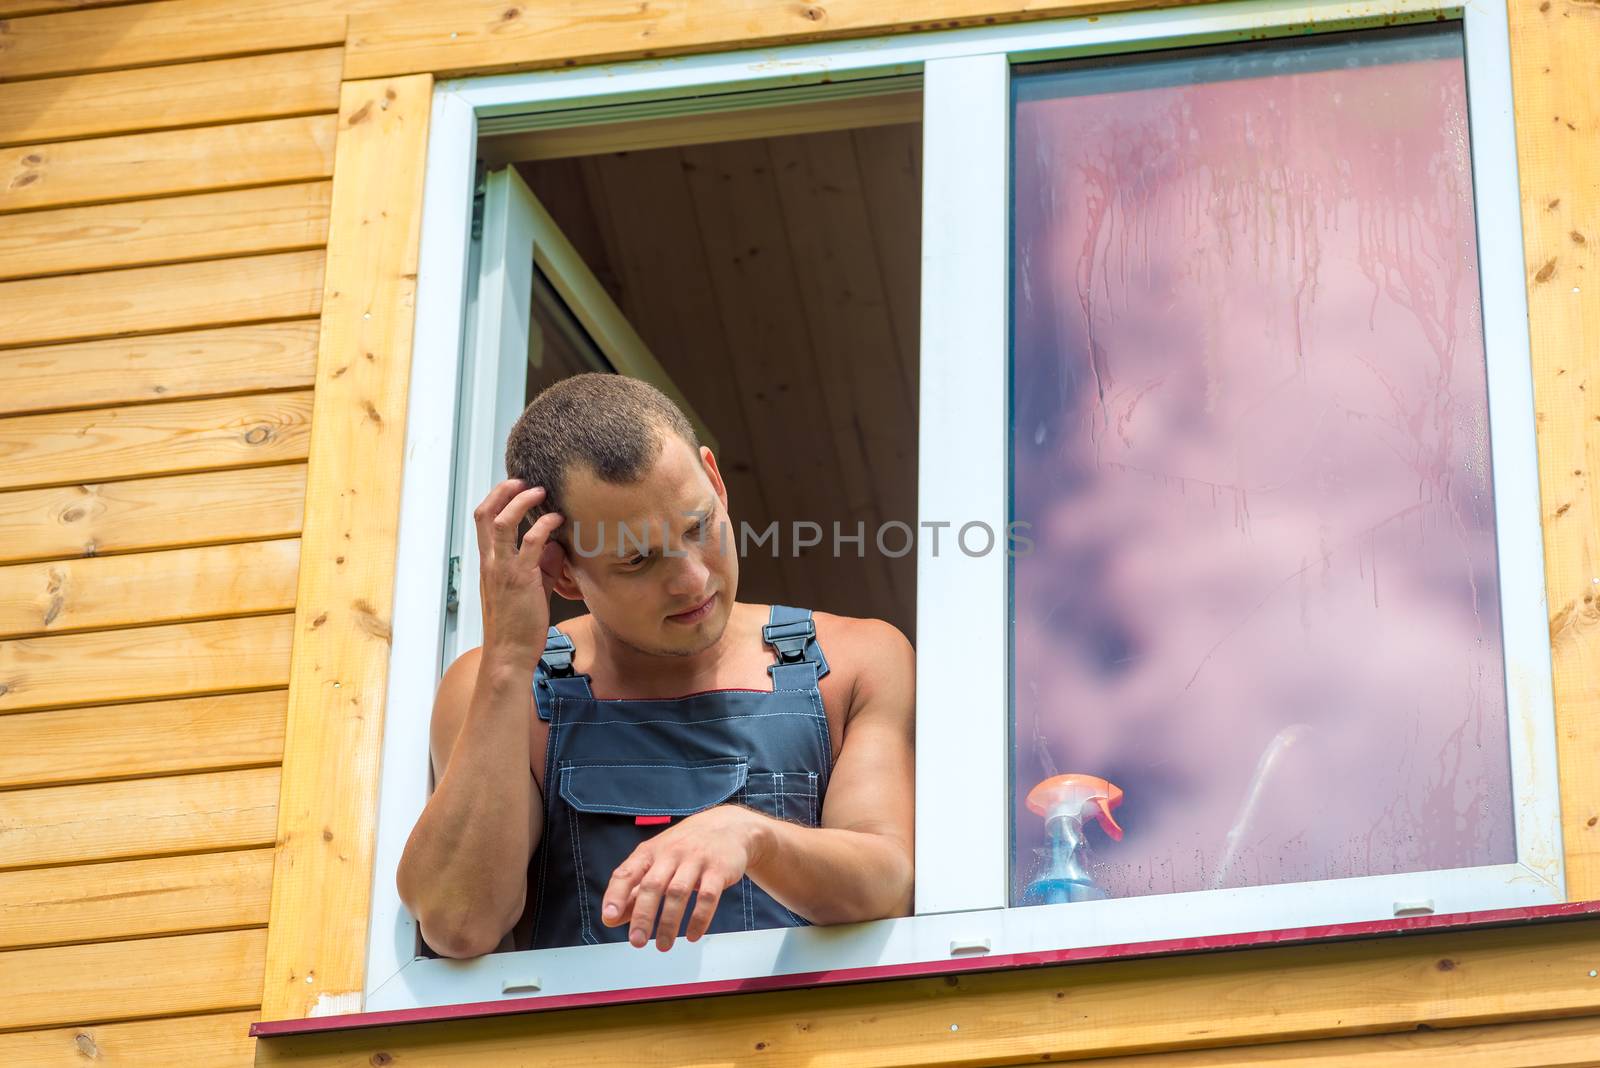 Pensive man in overalls reflects on washing the window in the house